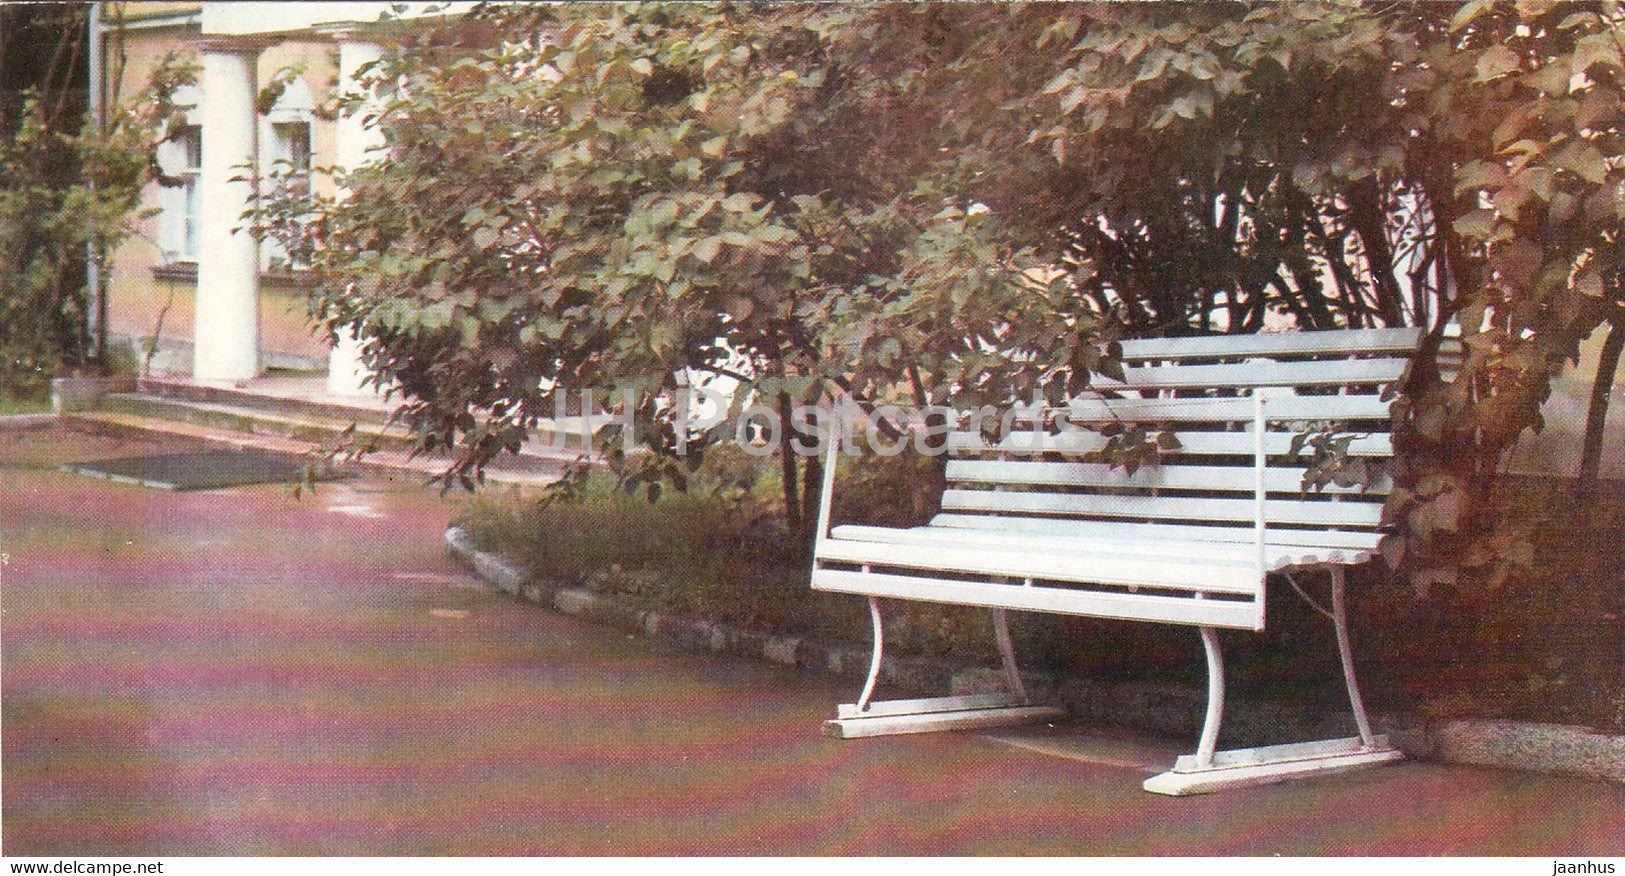 A Bench in front of the Northern Wing - Gorki Leninskiye - 1981 - Russia USSR - unused - JH Postcards